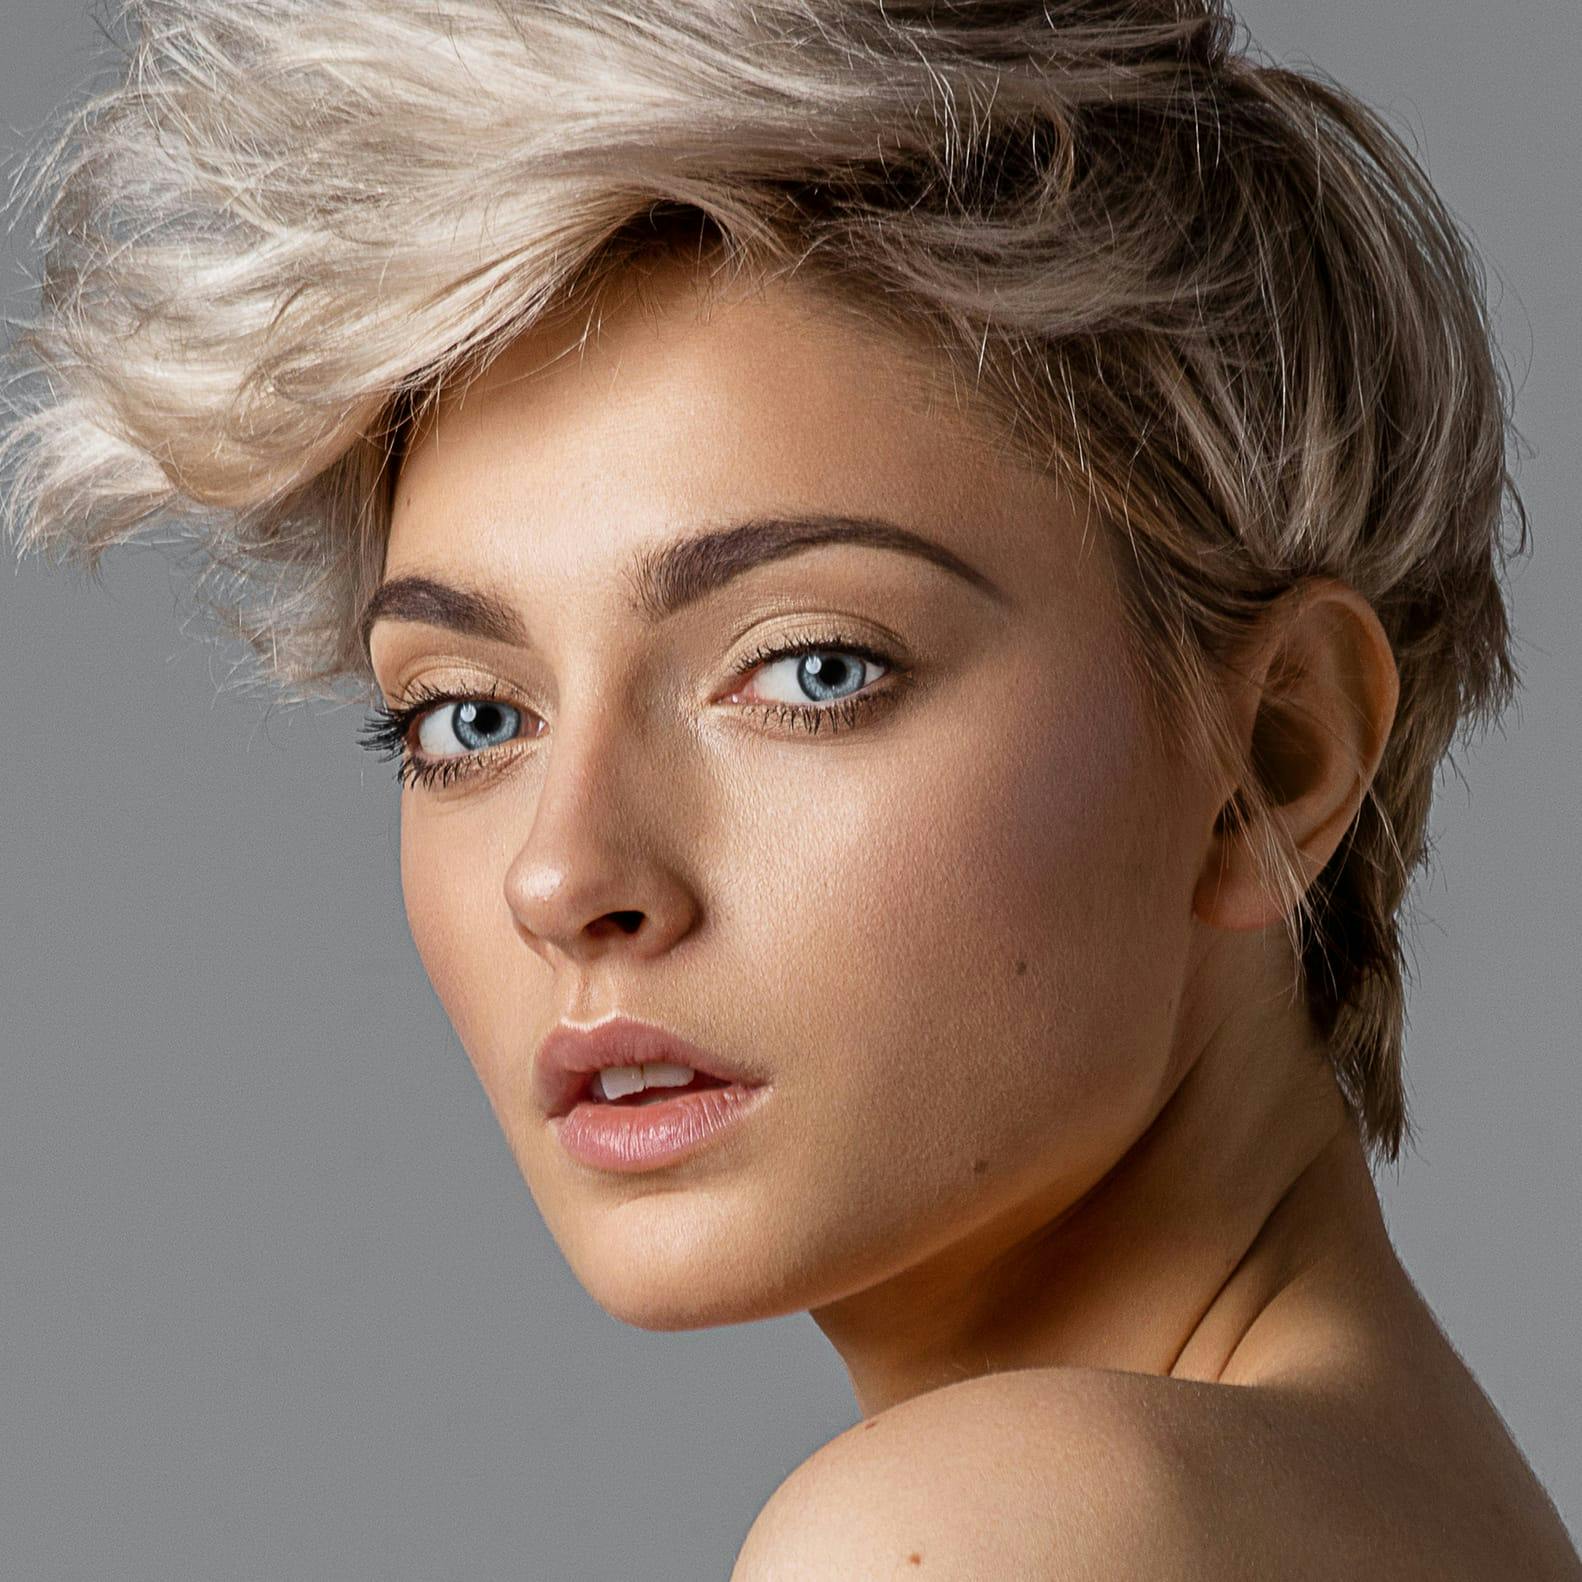 Woman with styled short hair